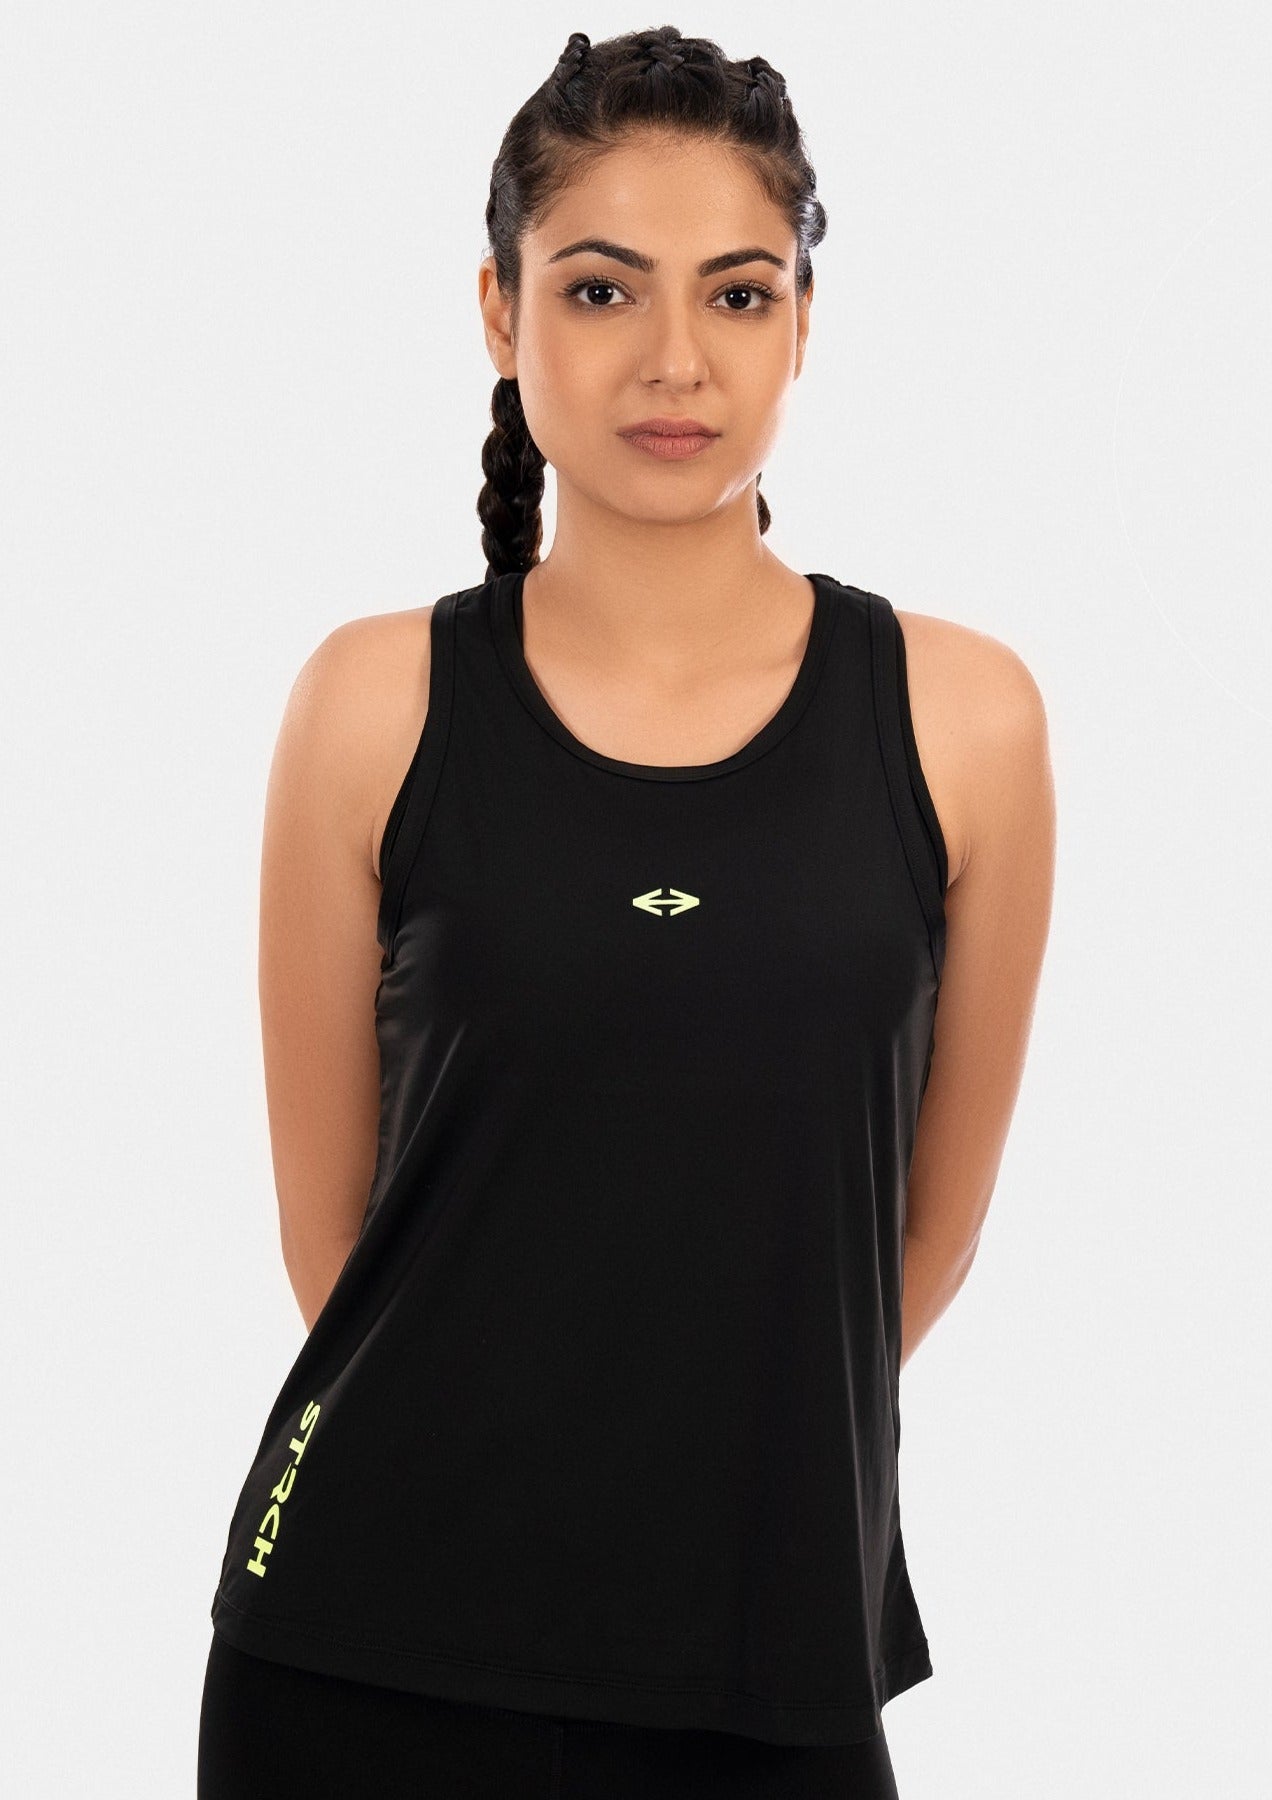 Buy Black Tank Top Online: Extra Mile Tank Top from Strch– Strch India